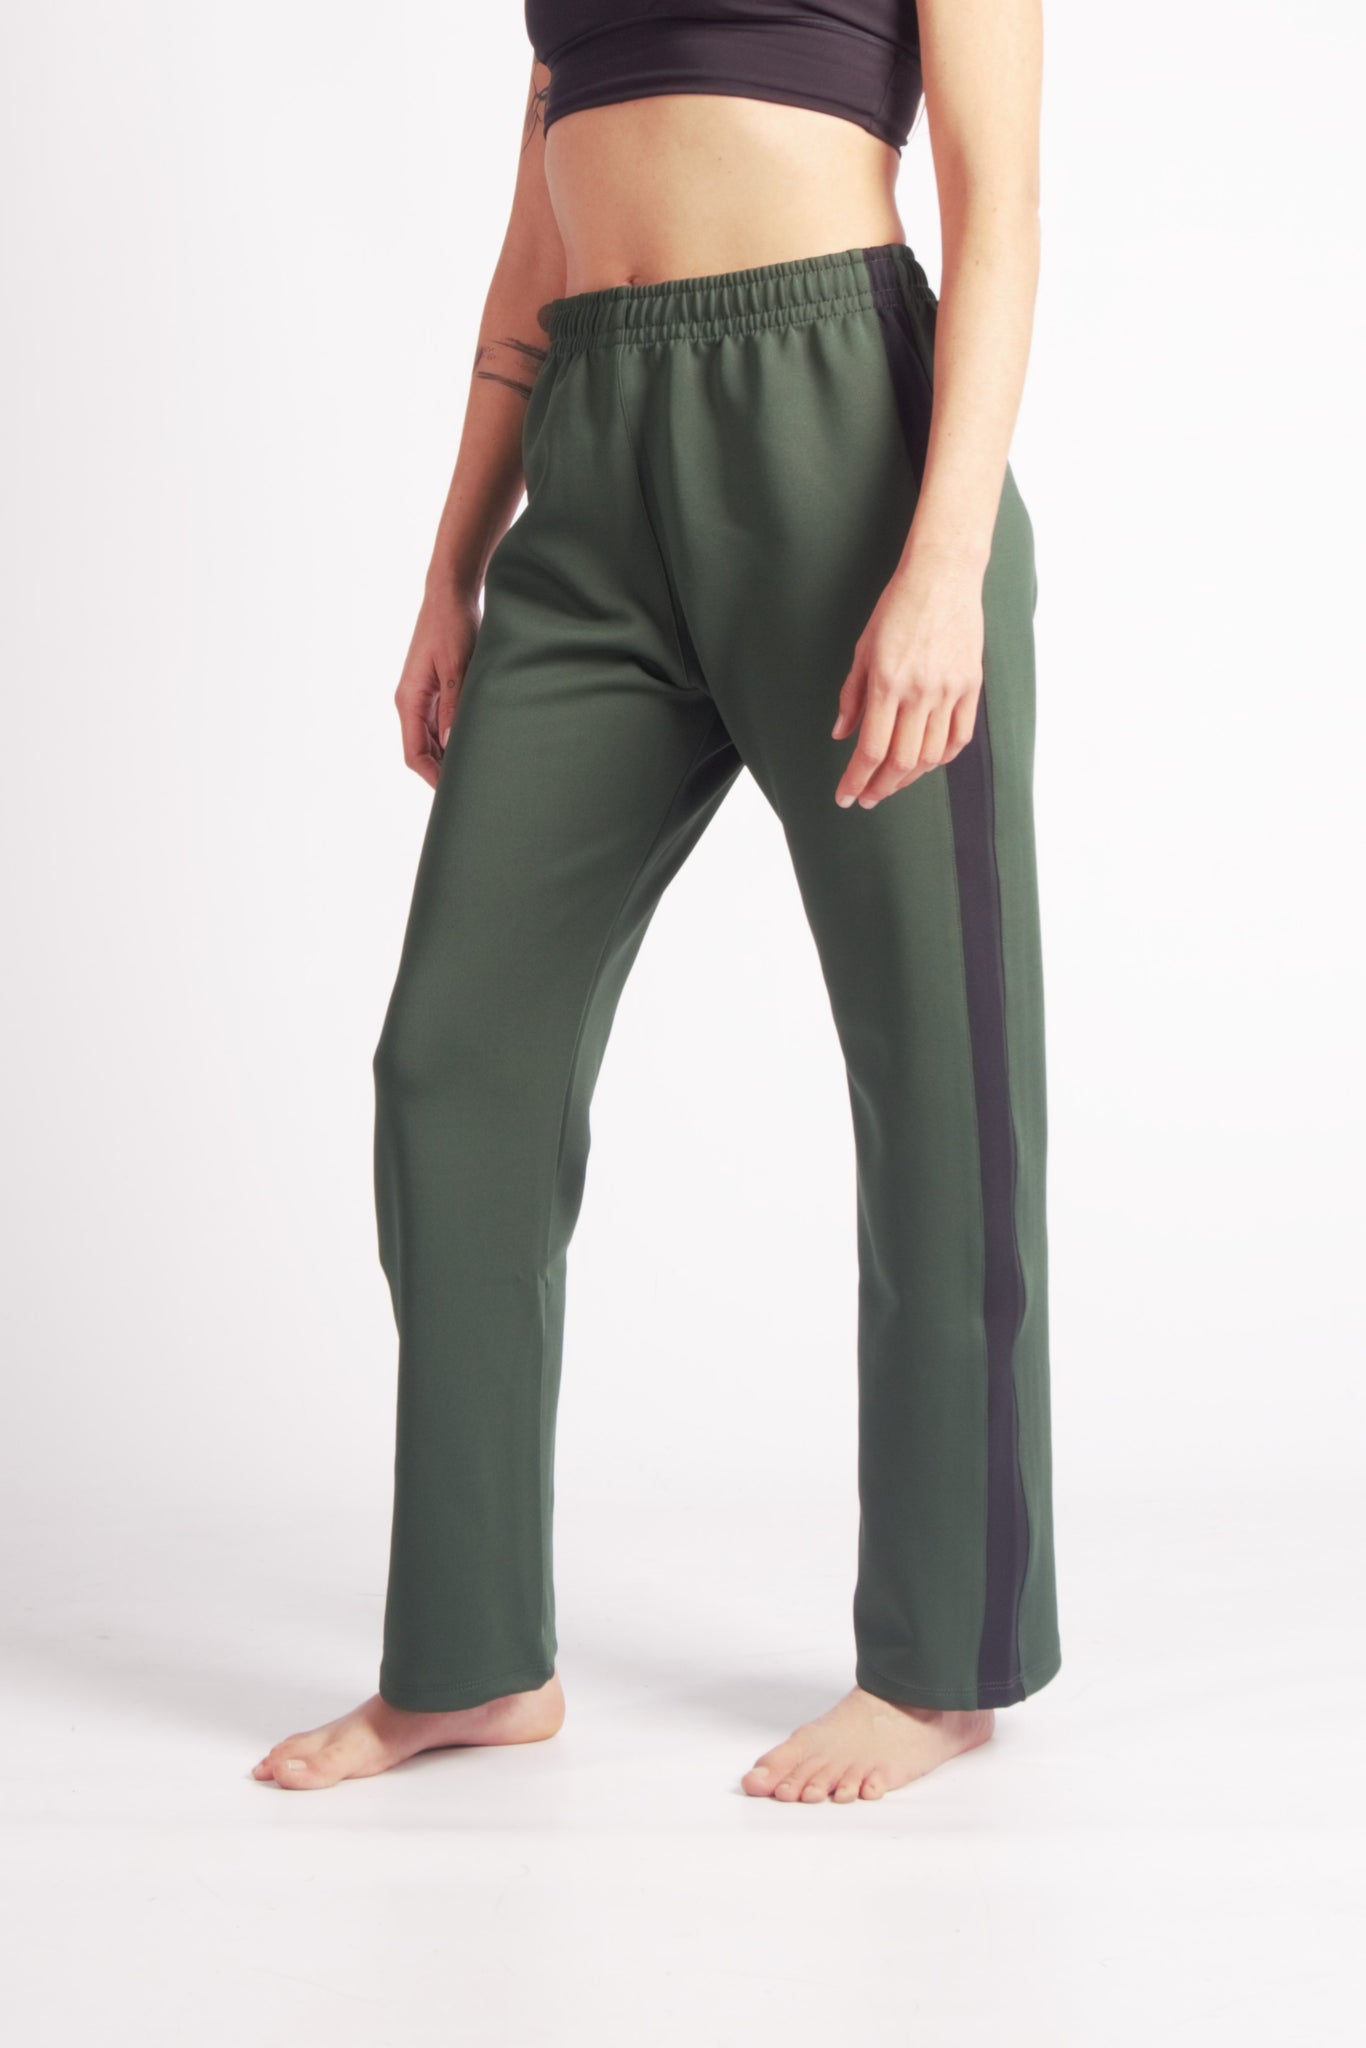 Flying Contemporary Dance Pants - Black & Green